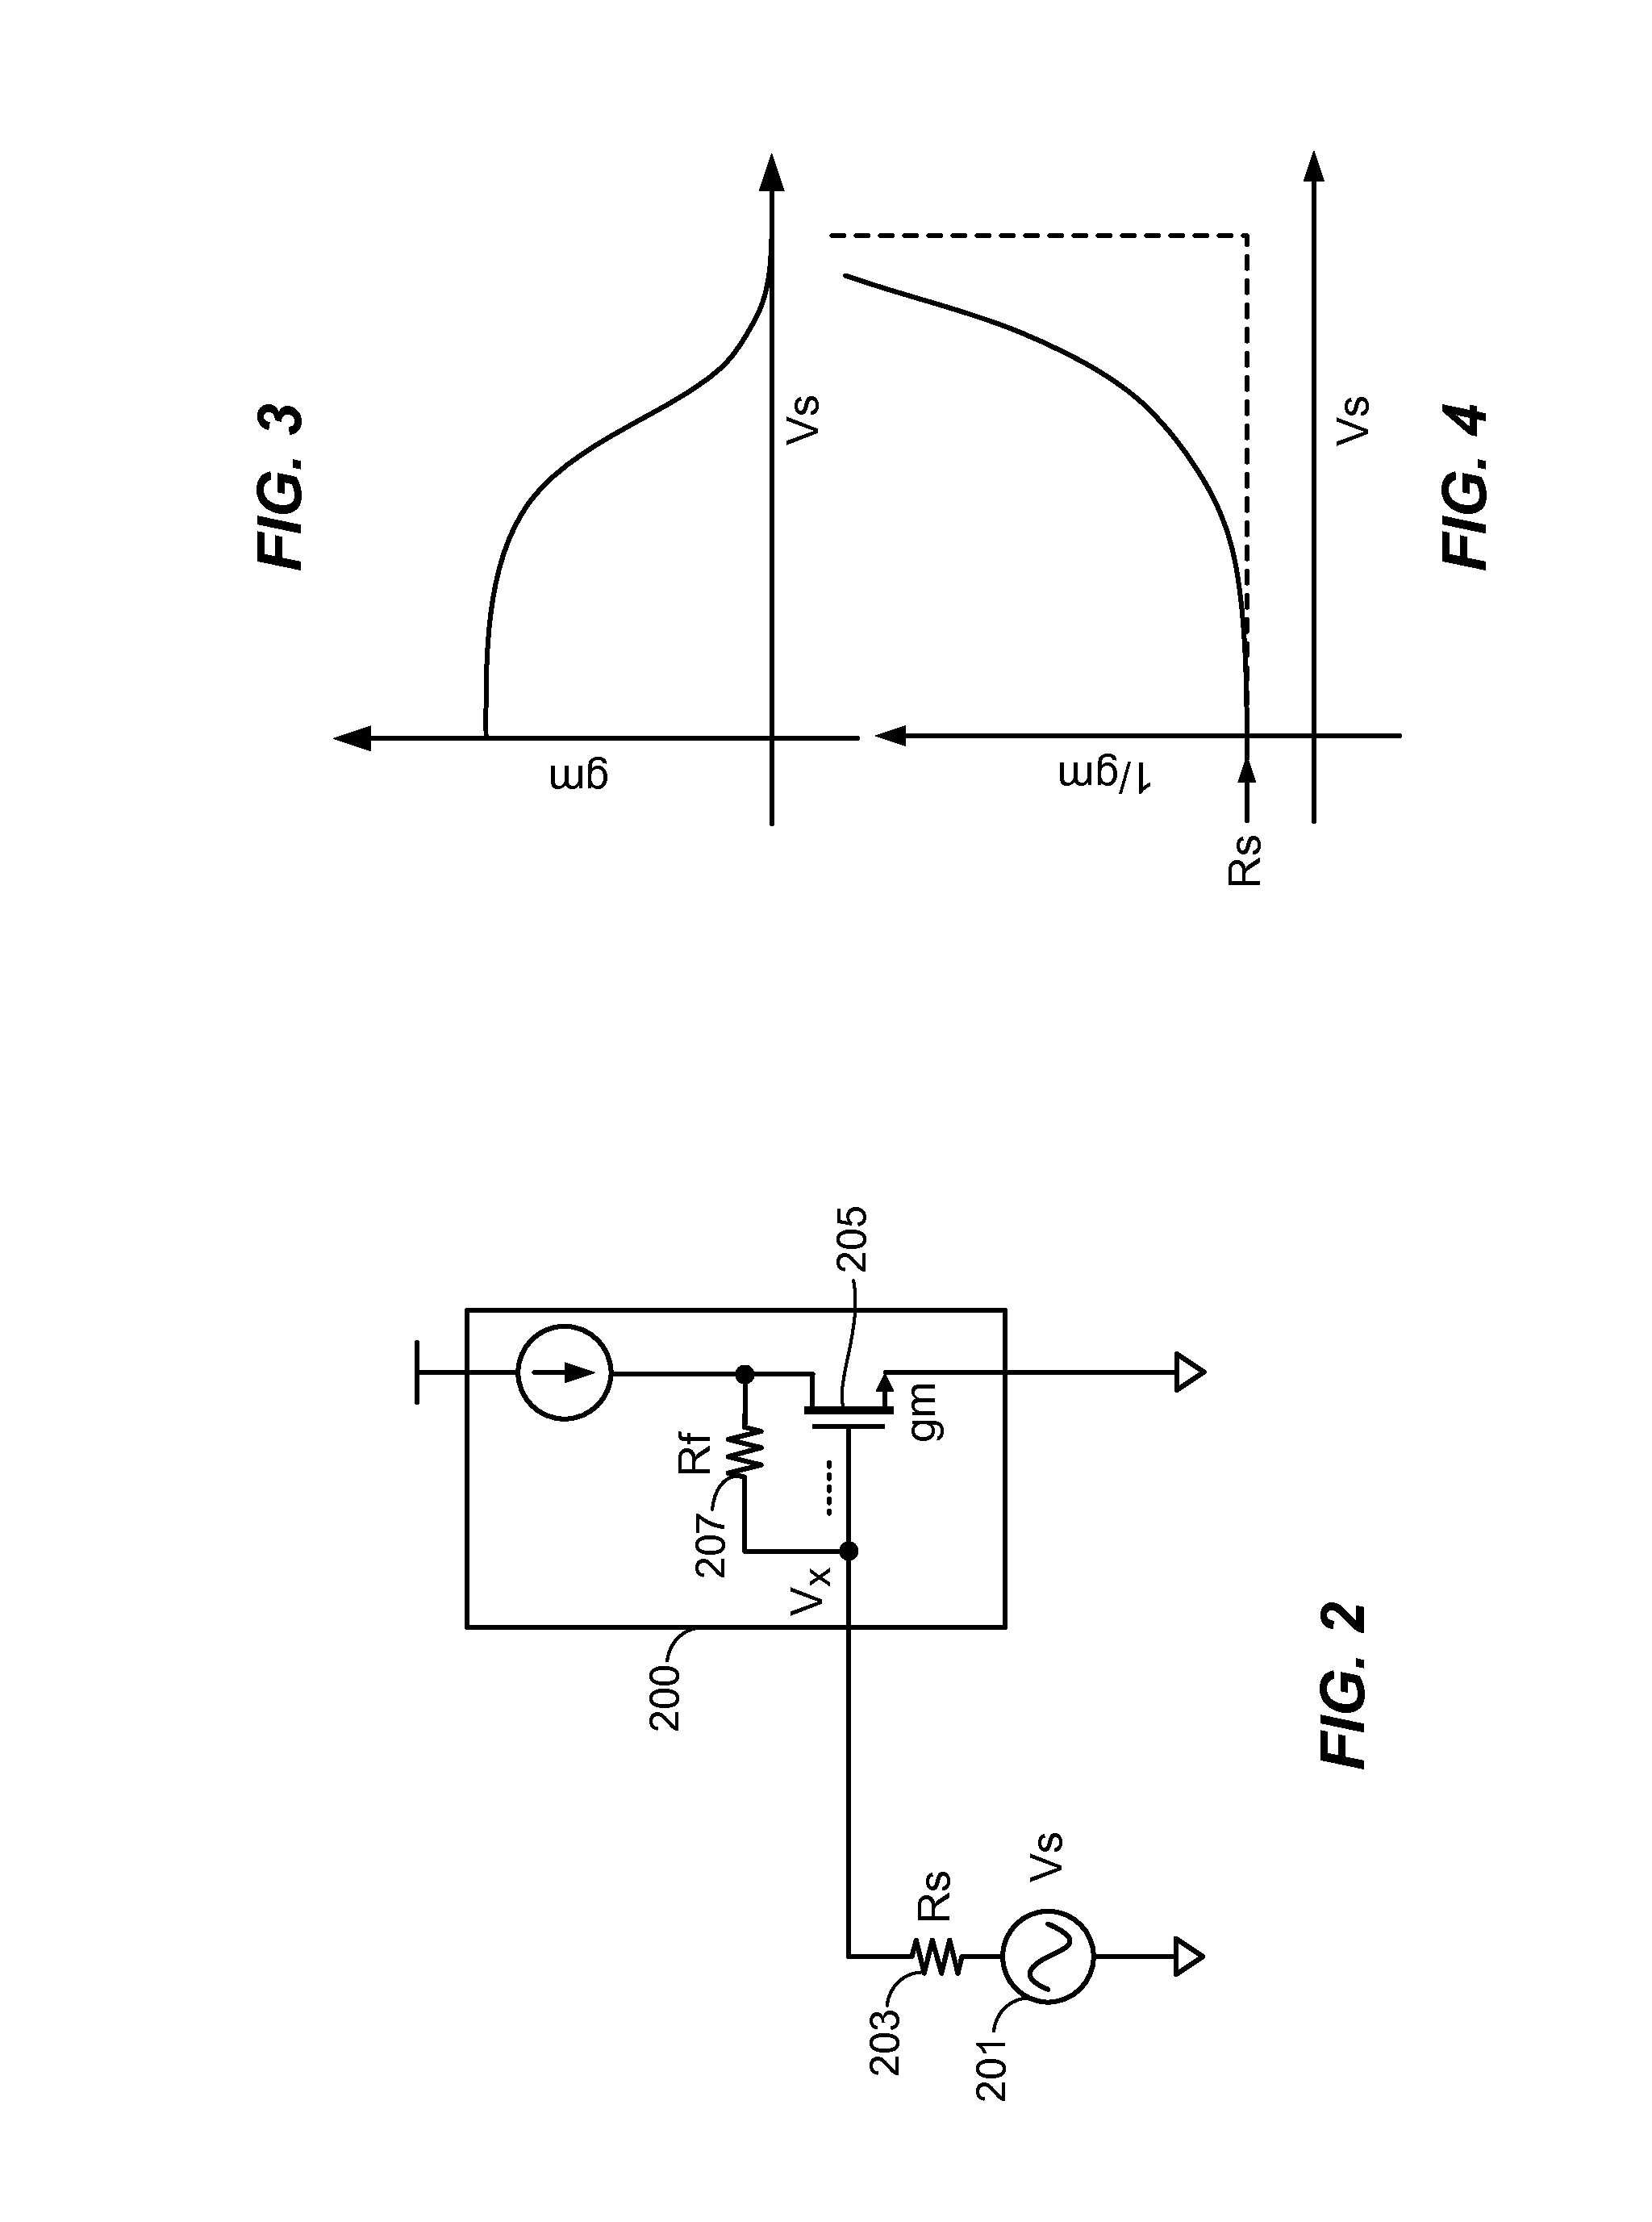 Method and apparatus for broadband input matching with noise and non-linearity cancellation in power amplifiers